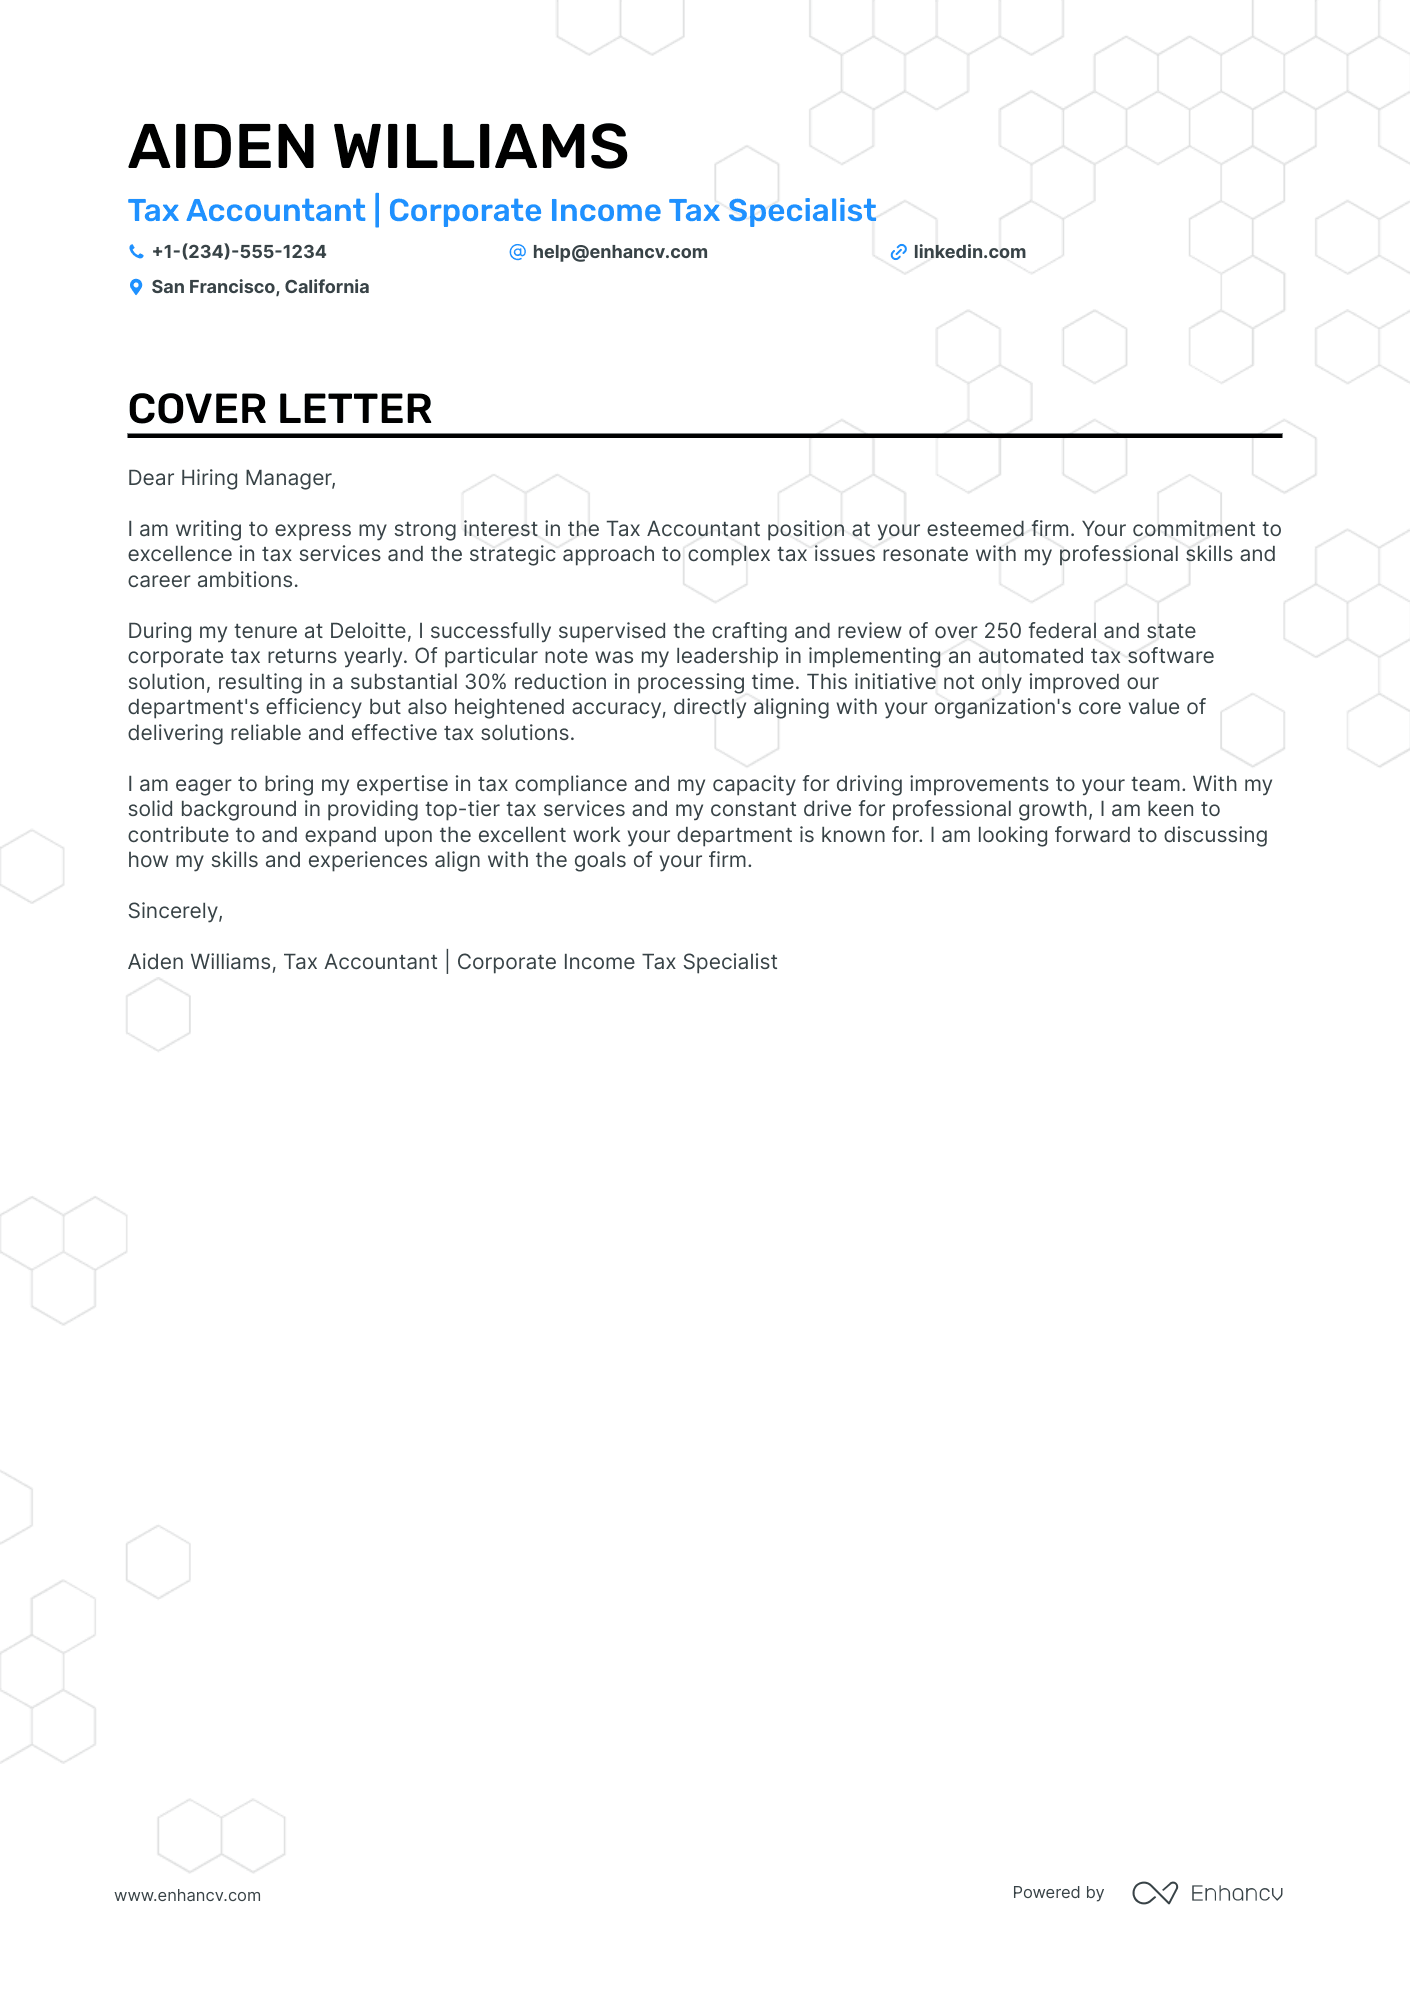 sample job application letter for certified public accountant